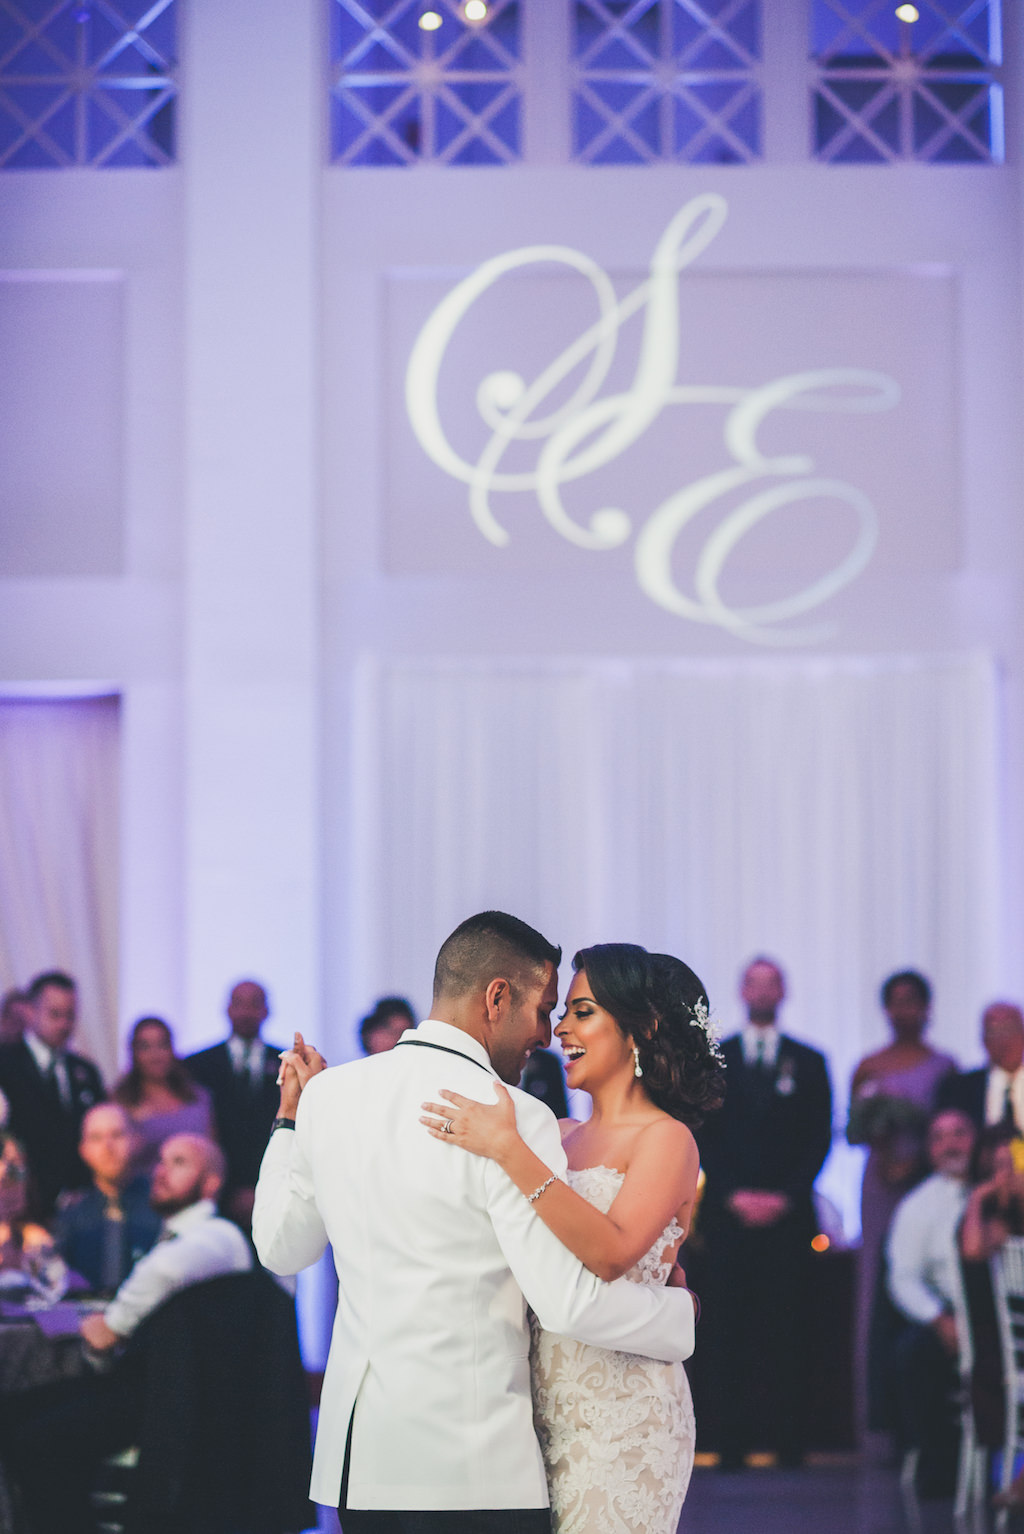 Modern Violet Wedding Reception First Dance Portrait, Groom in White Jacket, Bride in Strapless Ivory Lace Ines Di Santo Dress | Downtown Tampa Wedding Venue The Vault | Custom Monogram Projection and Purple Uplighting Nature Coast Entertainment | Dress Shop Isabel O'Neil Bridal Collection